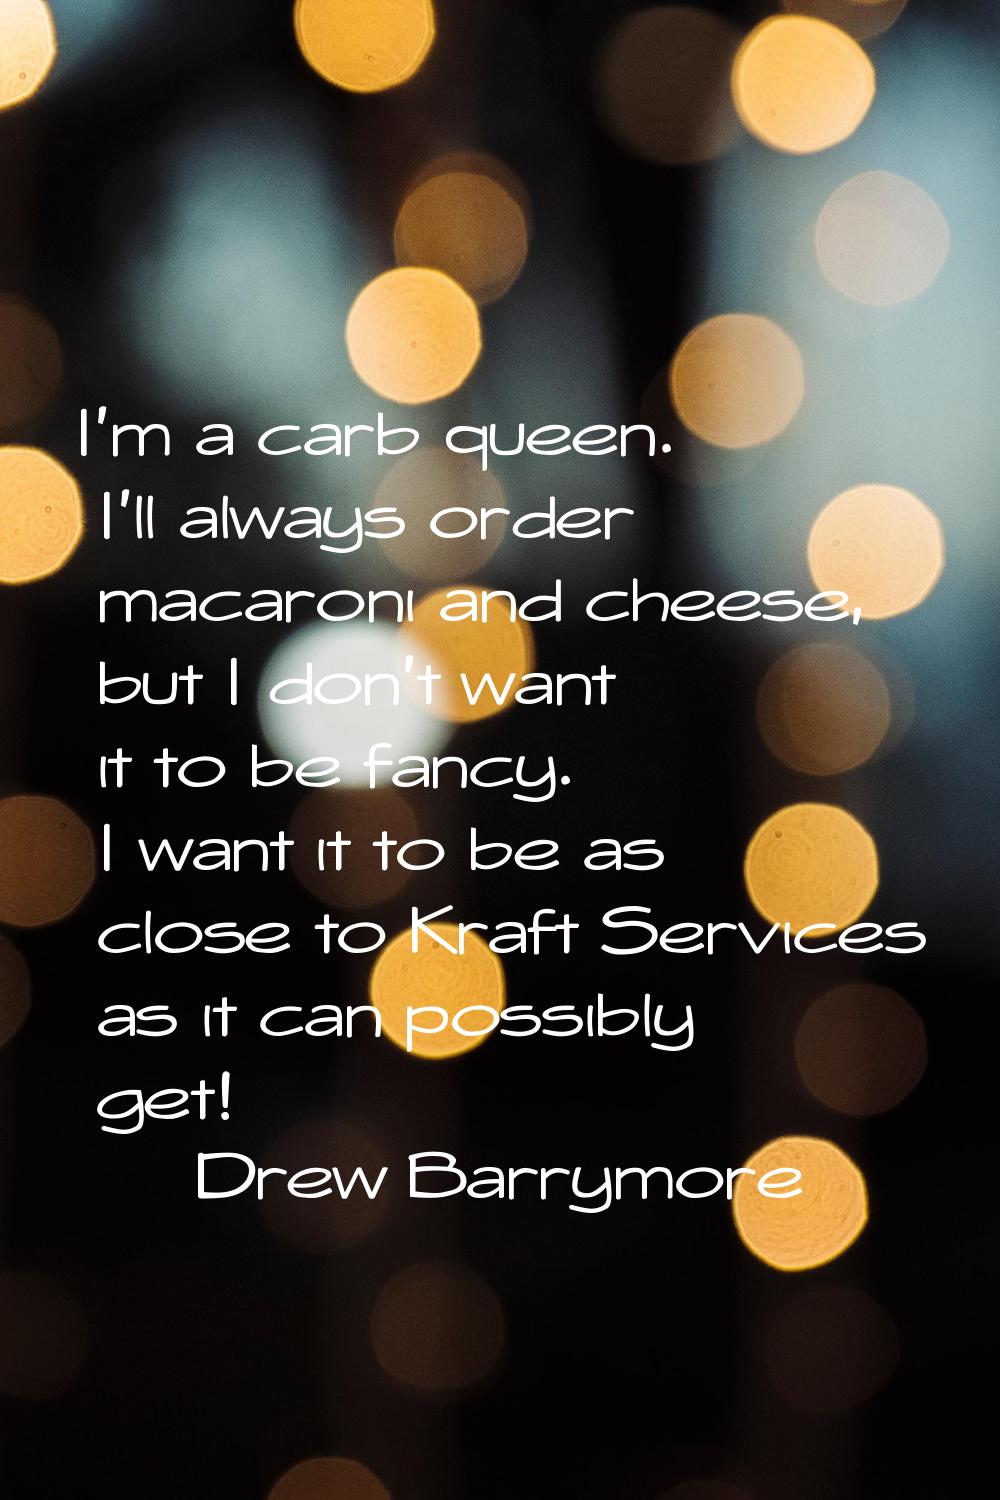 I'm a carb queen. I'll always order macaroni and cheese, but I don't want it to be fancy. I want it